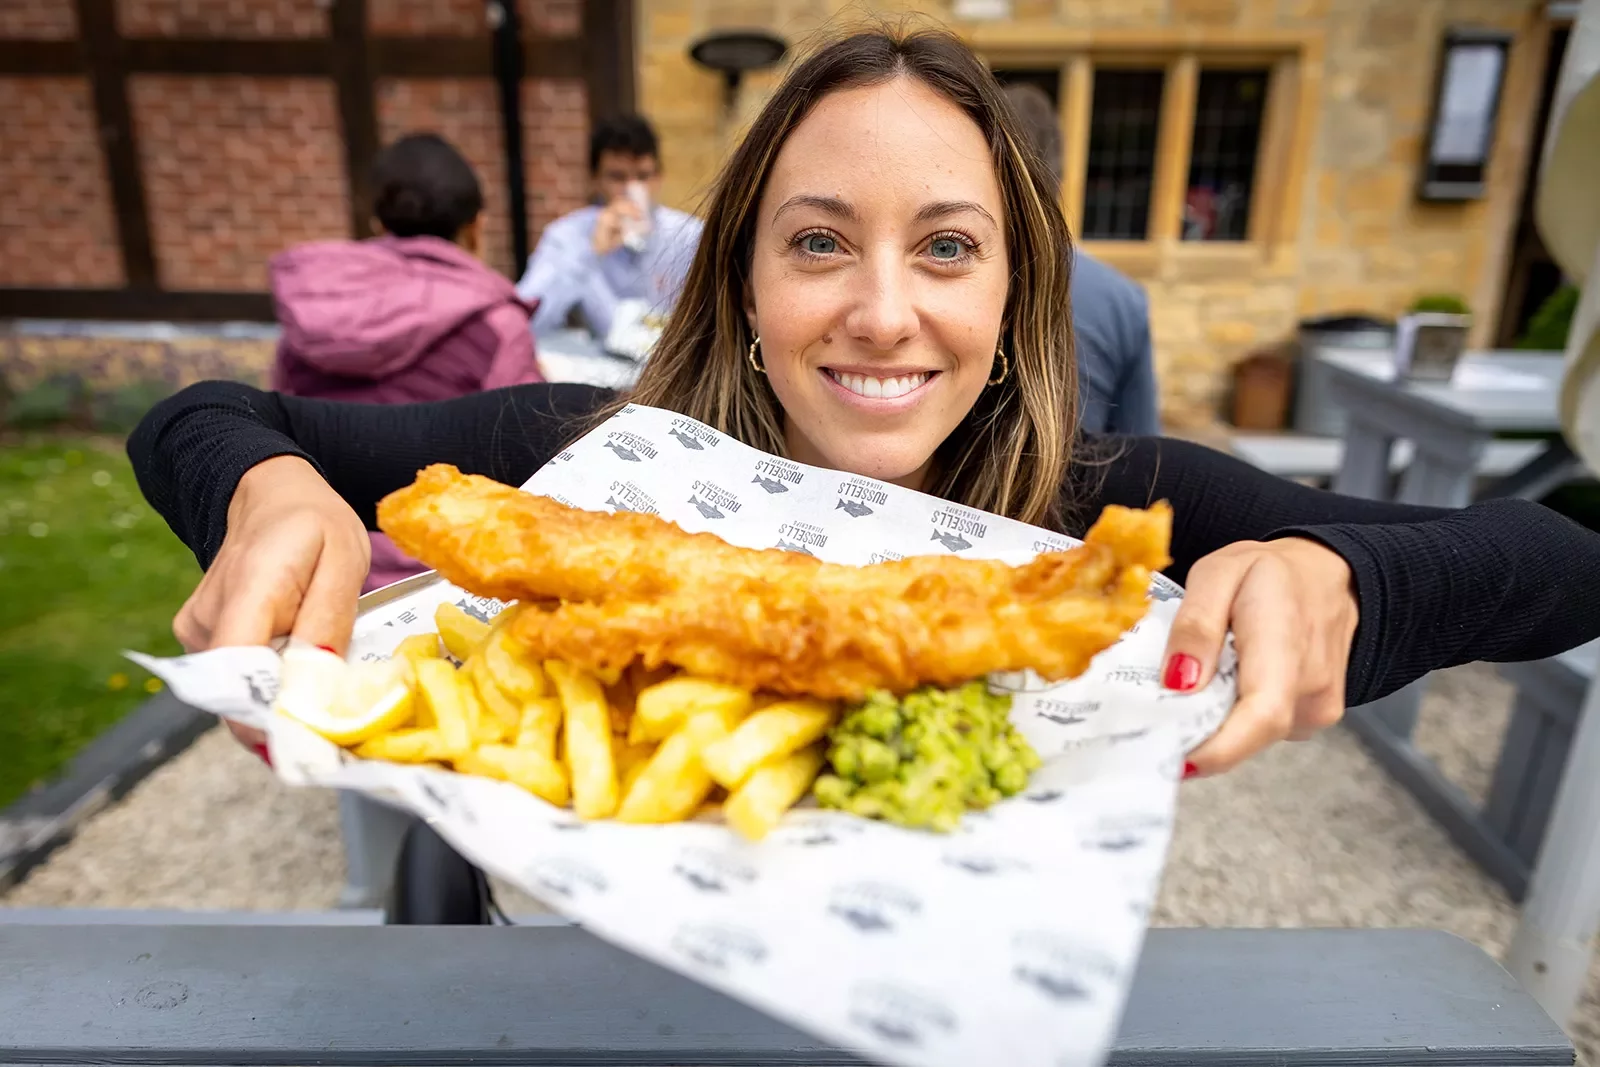 Backroads guest posing with fish and chips plate in England.